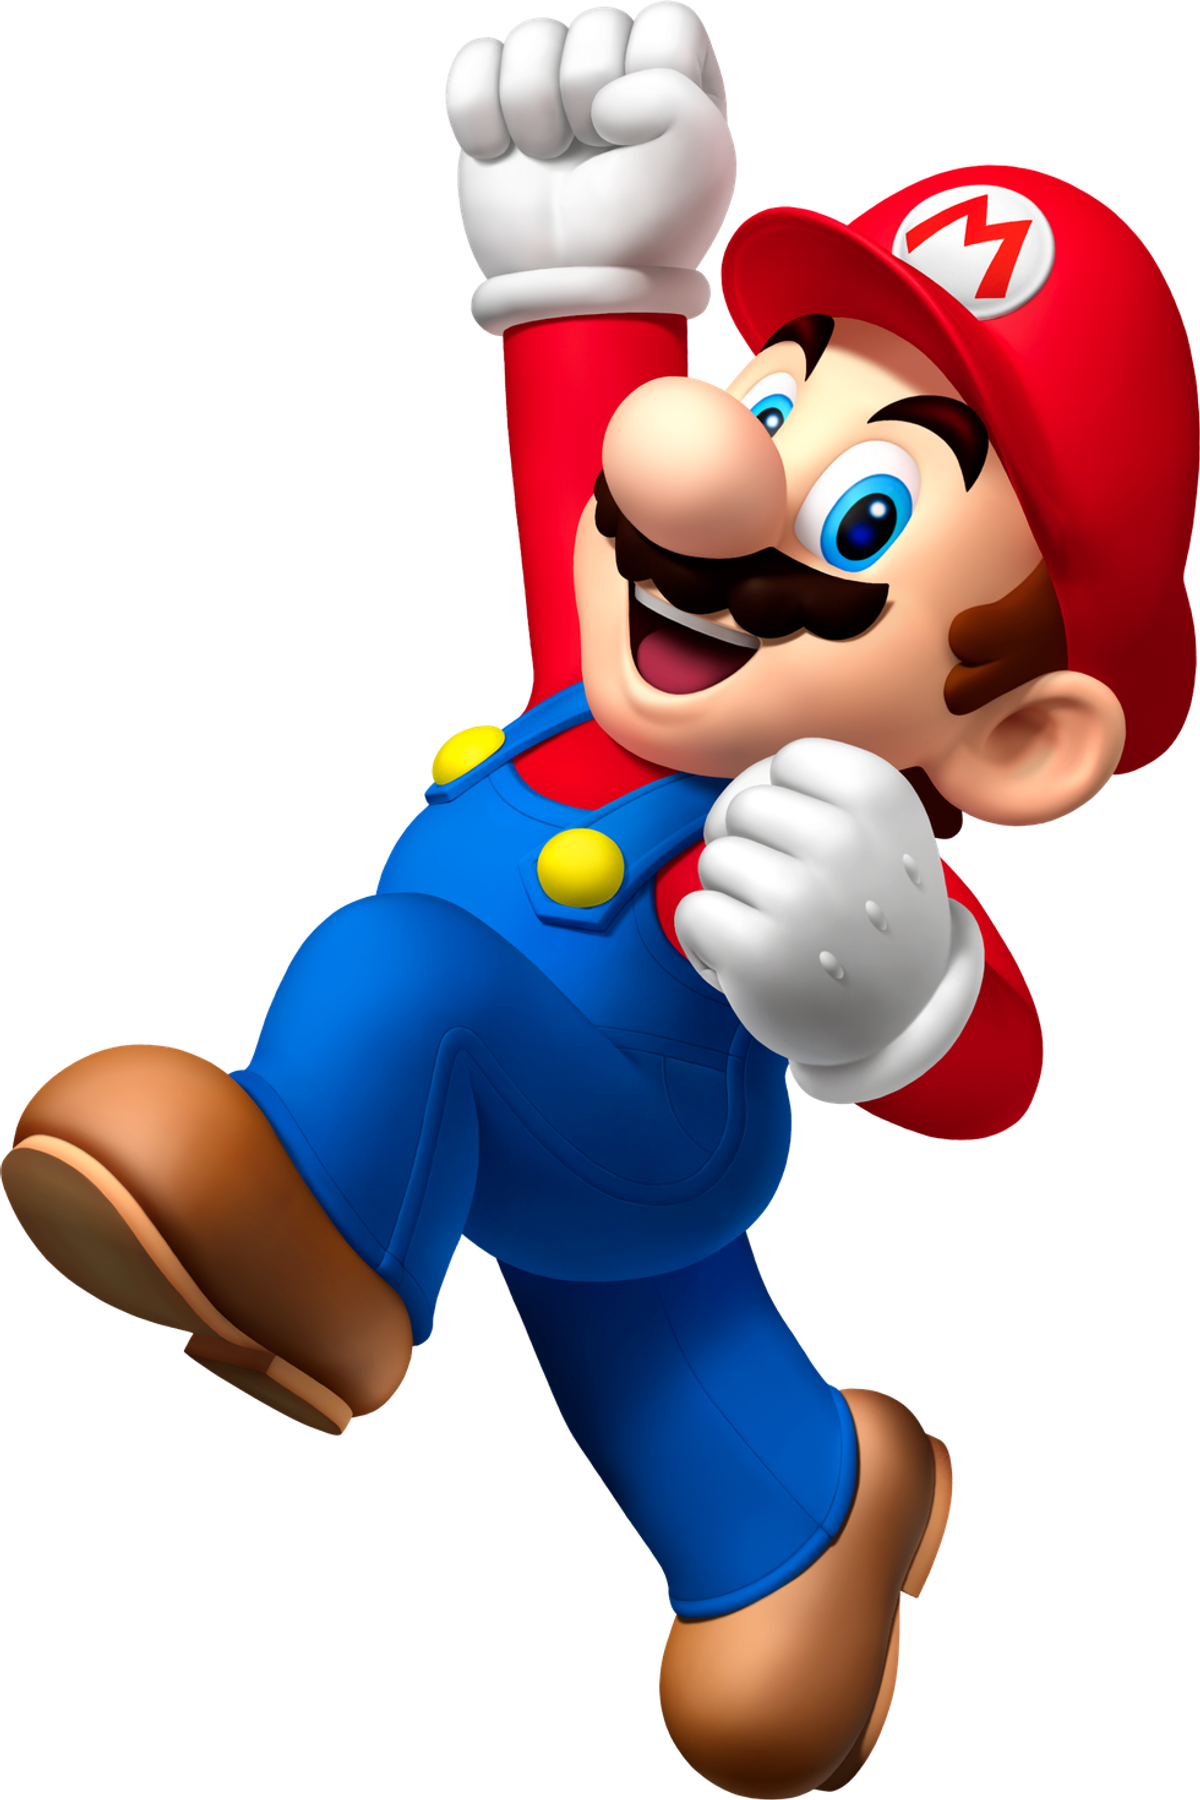 11 Interesting Facts About Mario